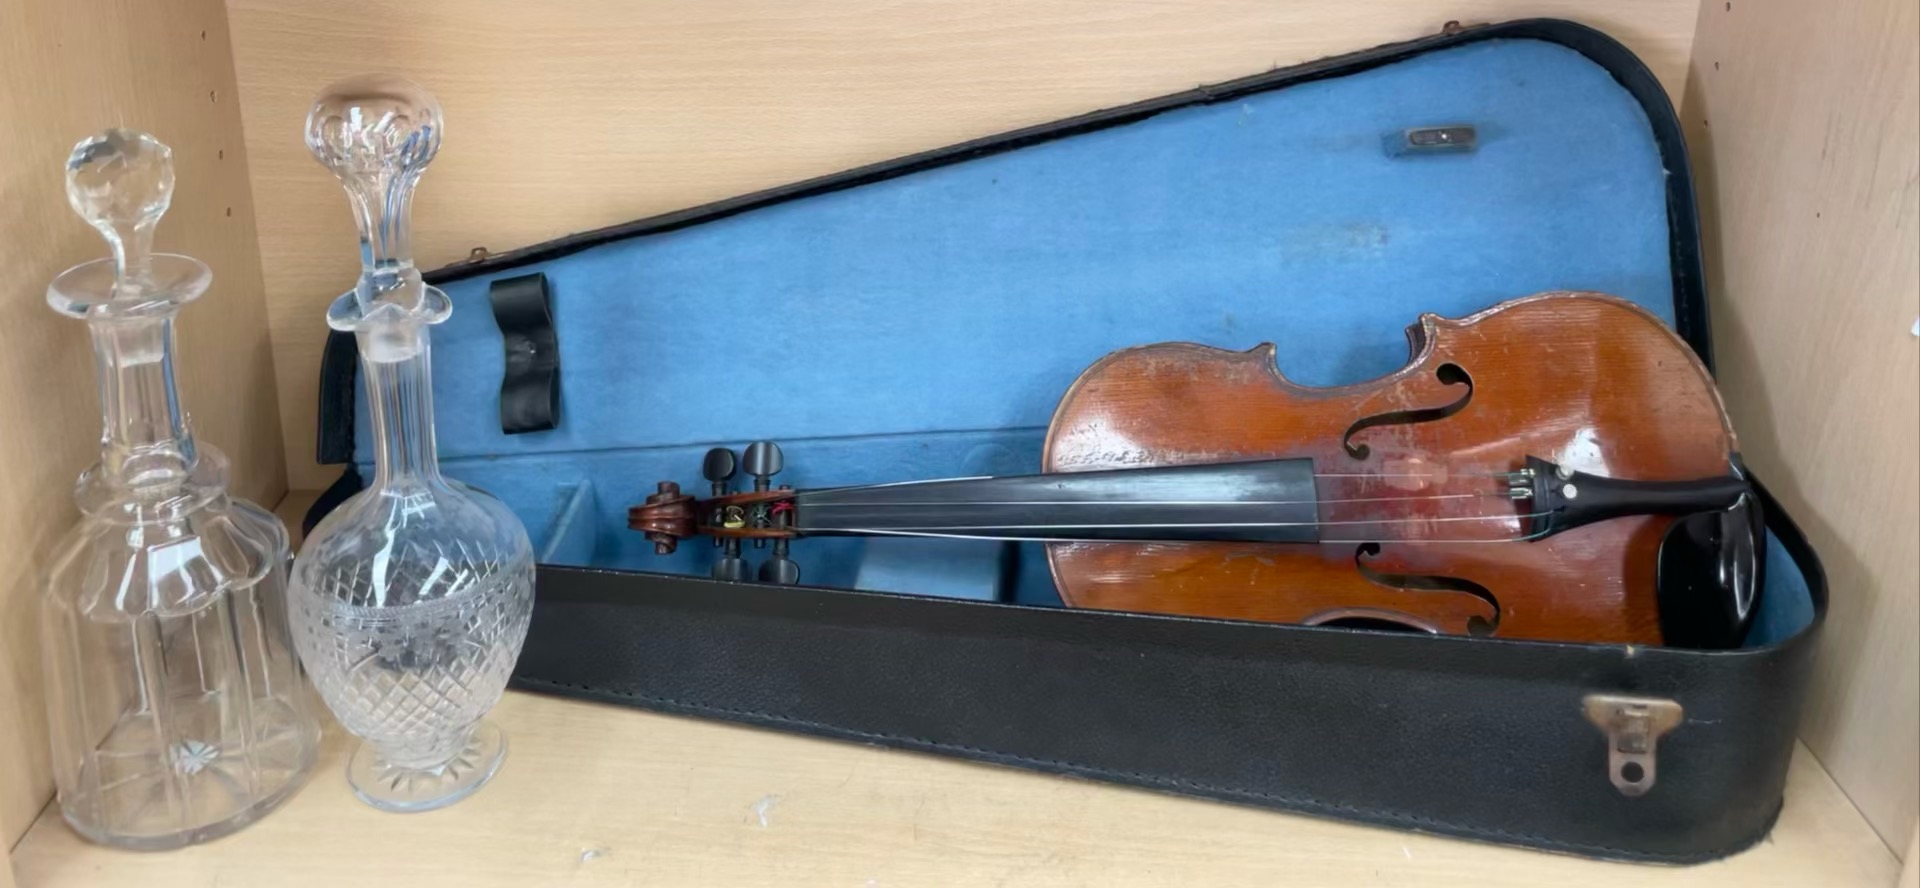 A Fortis and Dulcis violin, with a one piece back and ebonised stringing,